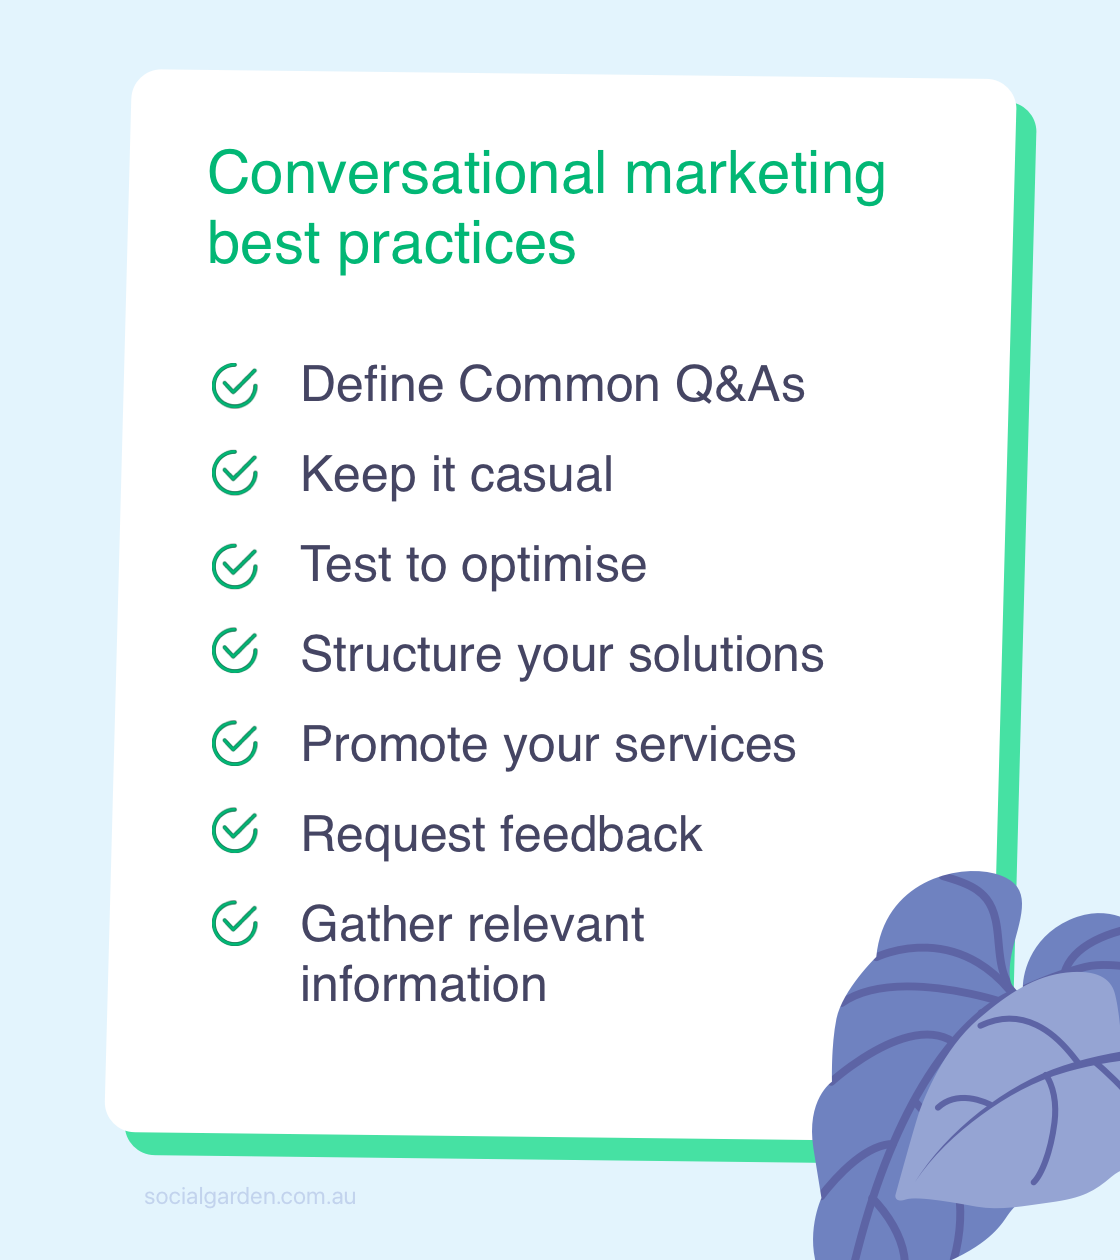 The 7 steps of conversational marketing